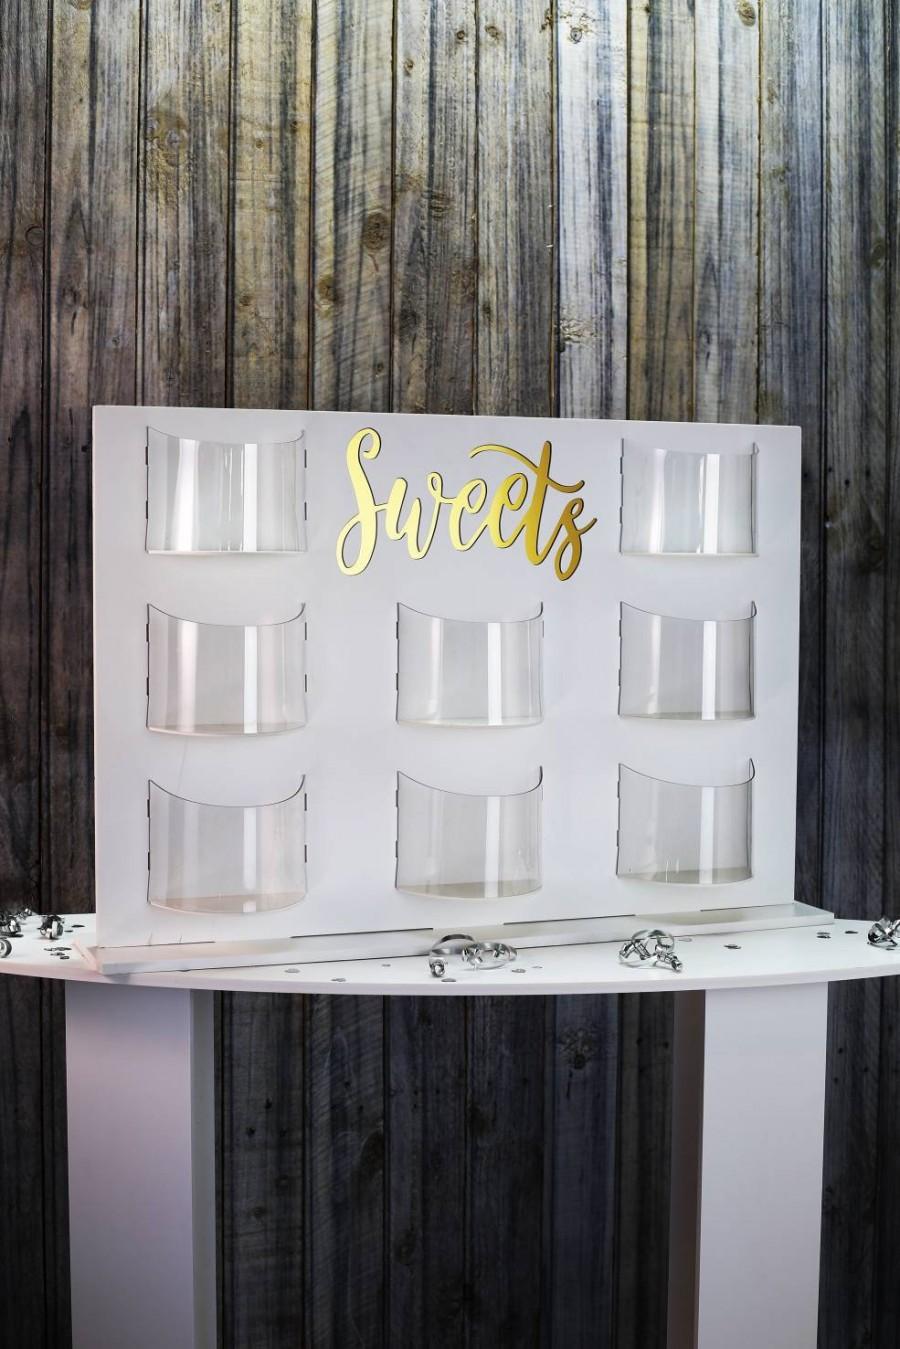 Wedding - Sweet Wall Candy Wall White Plastic with Gold acrylic Text Engraved Candy Cart with Clear Pockets Various Size Options . pic.SW8Freestanding